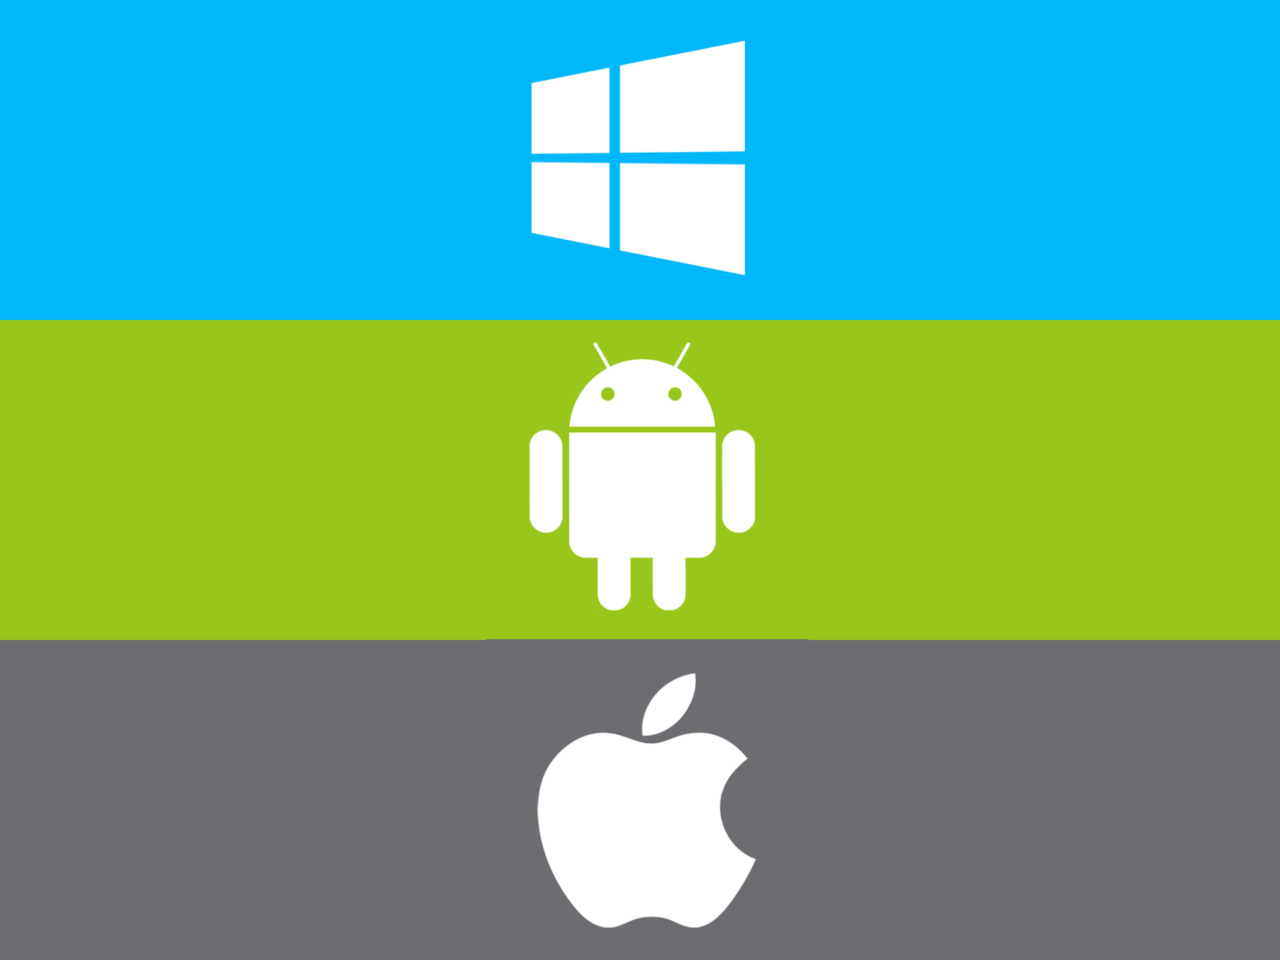 Windows, Apple, Android - What's Your Choice? wallpaper 1280x960